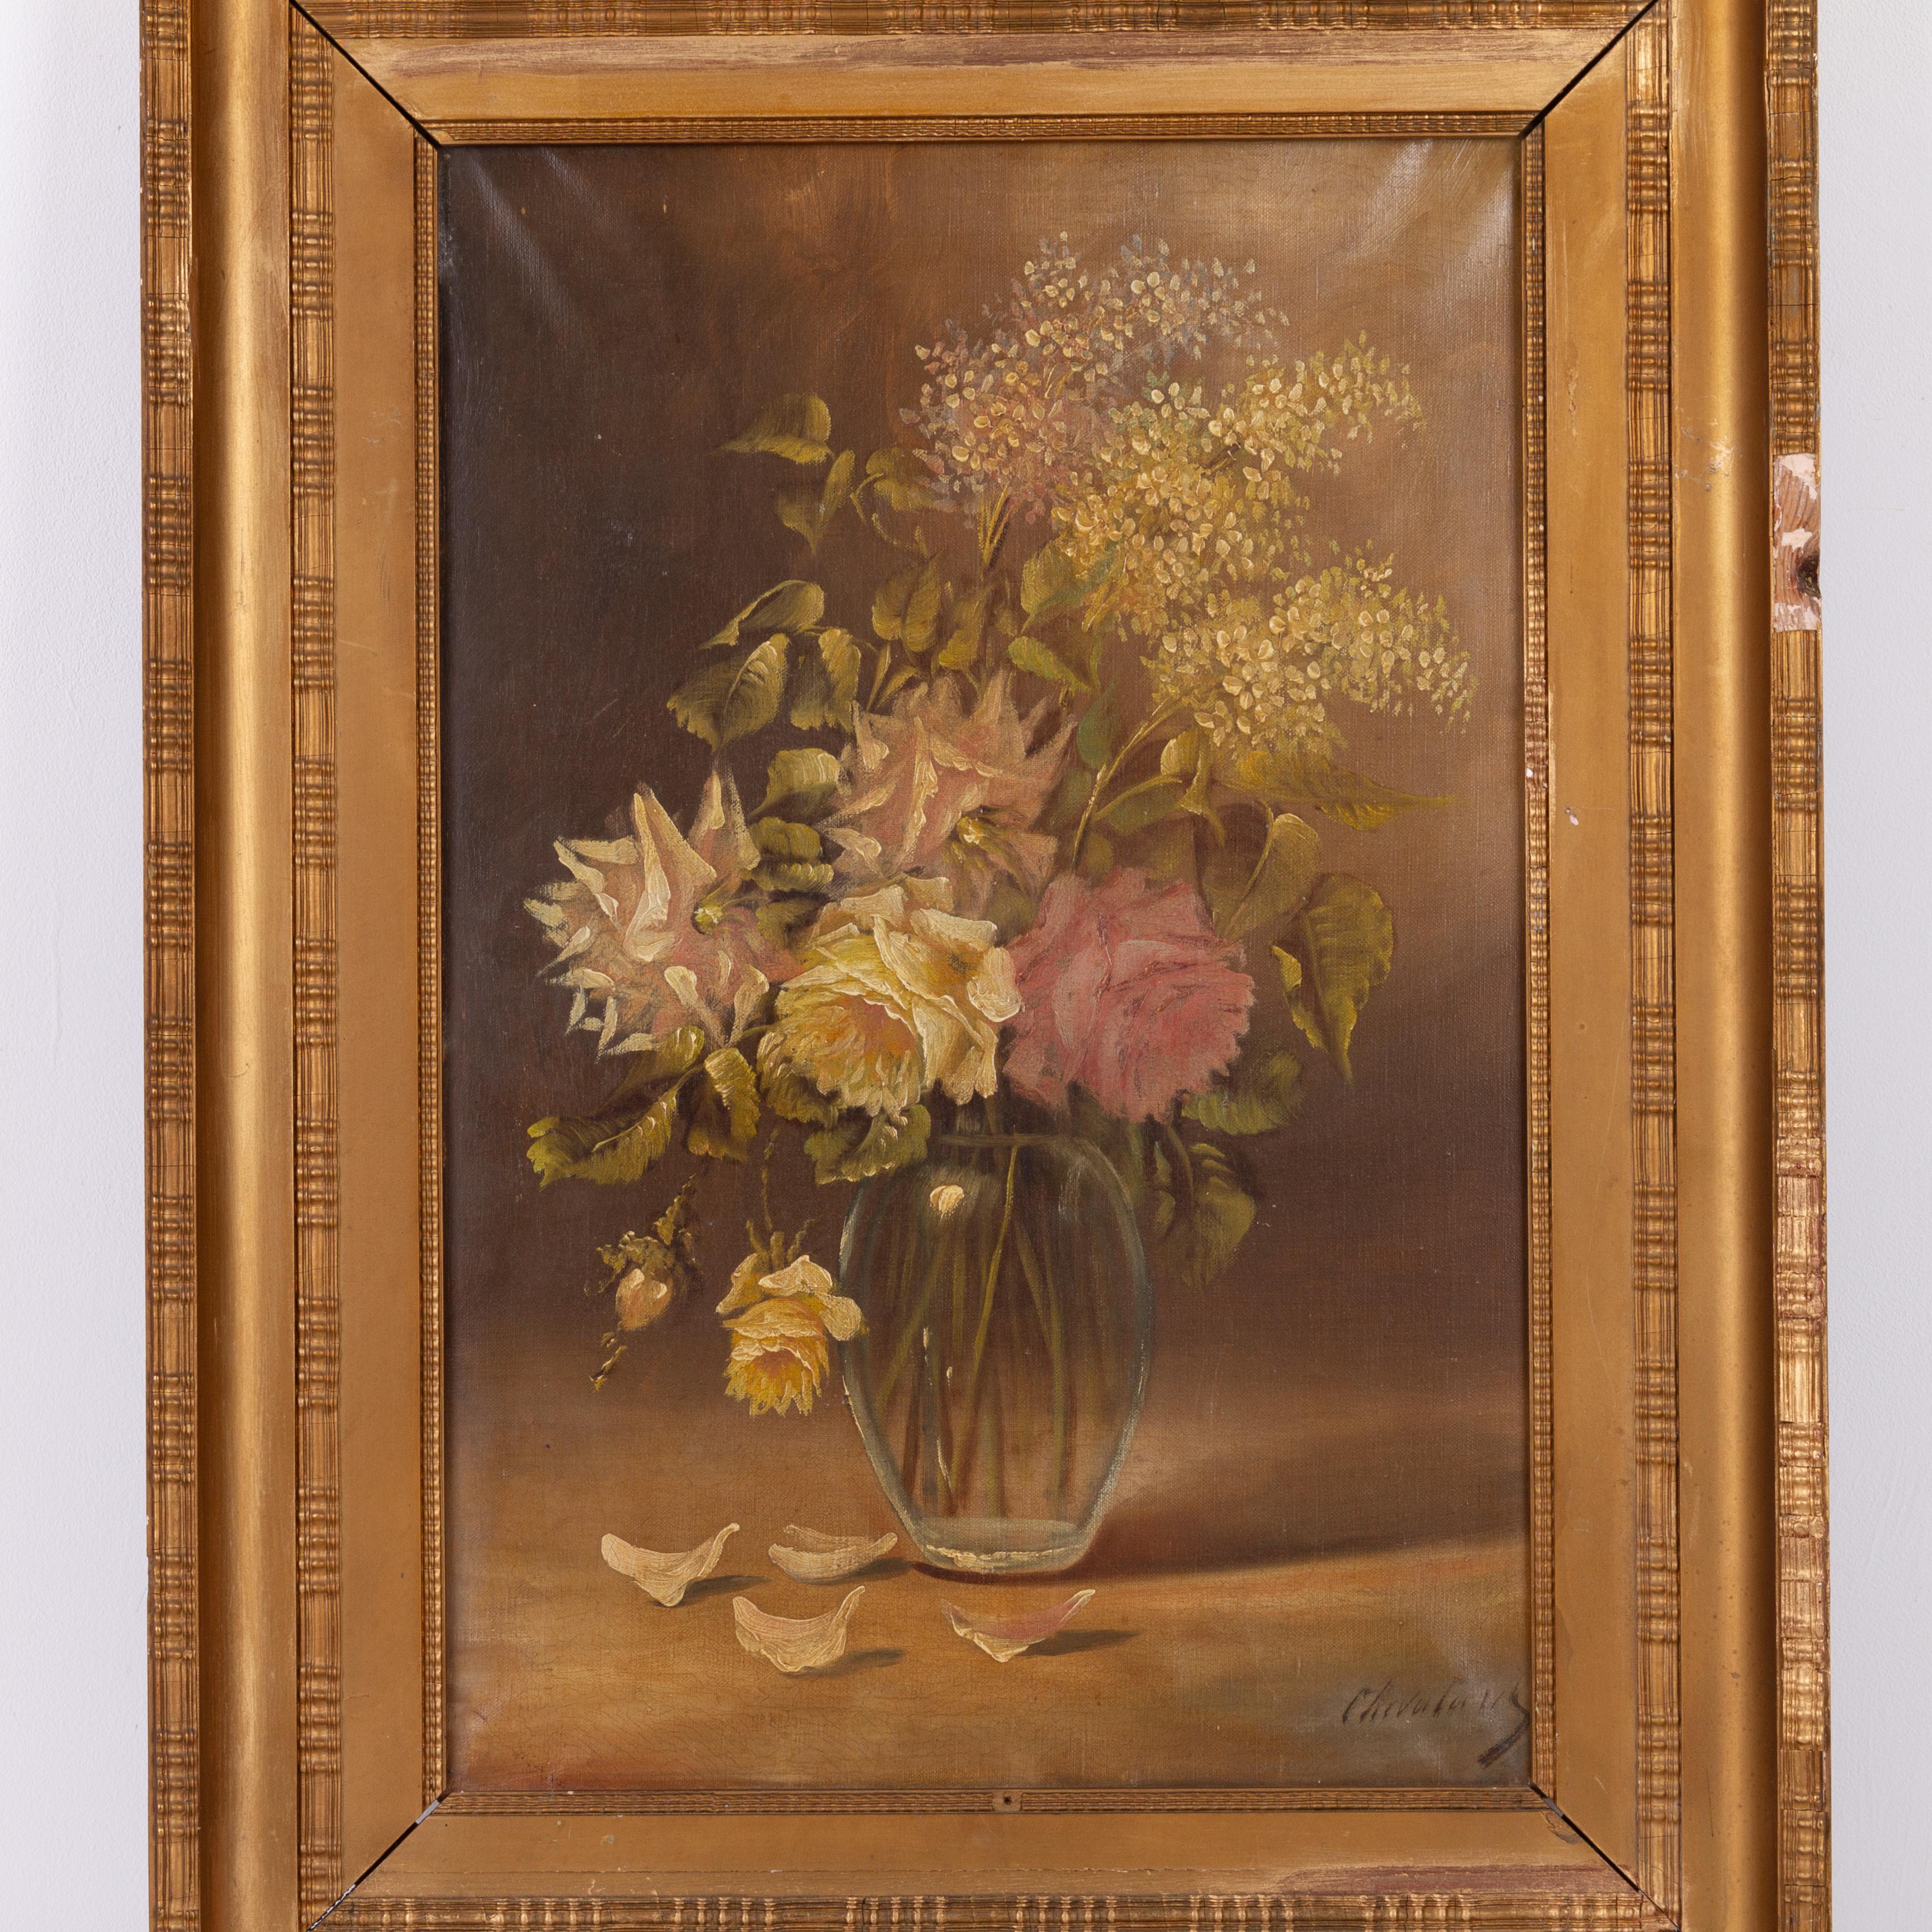 In good condition
From a private collection
Free international shipping
French Still Life Flowers Oil Painting Signed
